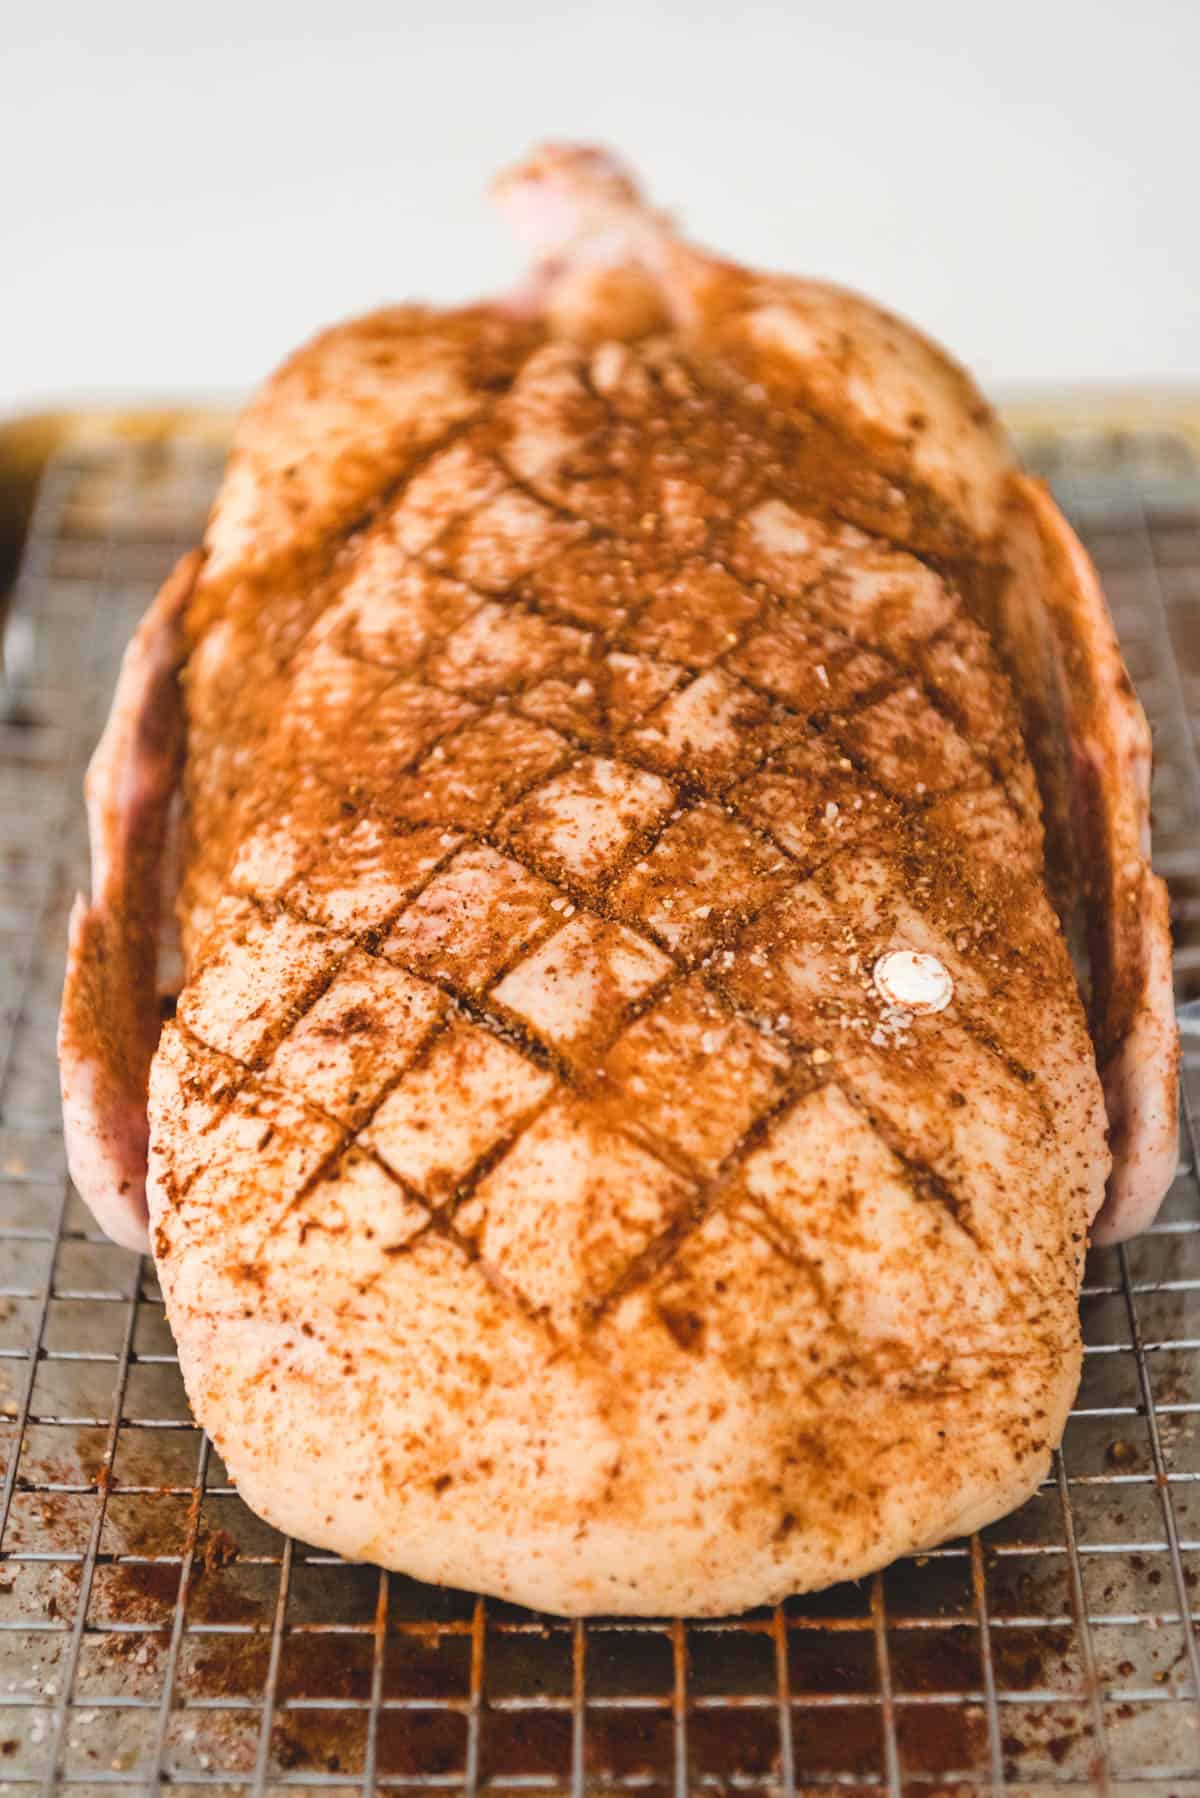 An image of a scored duck breast on a whole duck, rubbed with a spice rub for roasting in the oven.